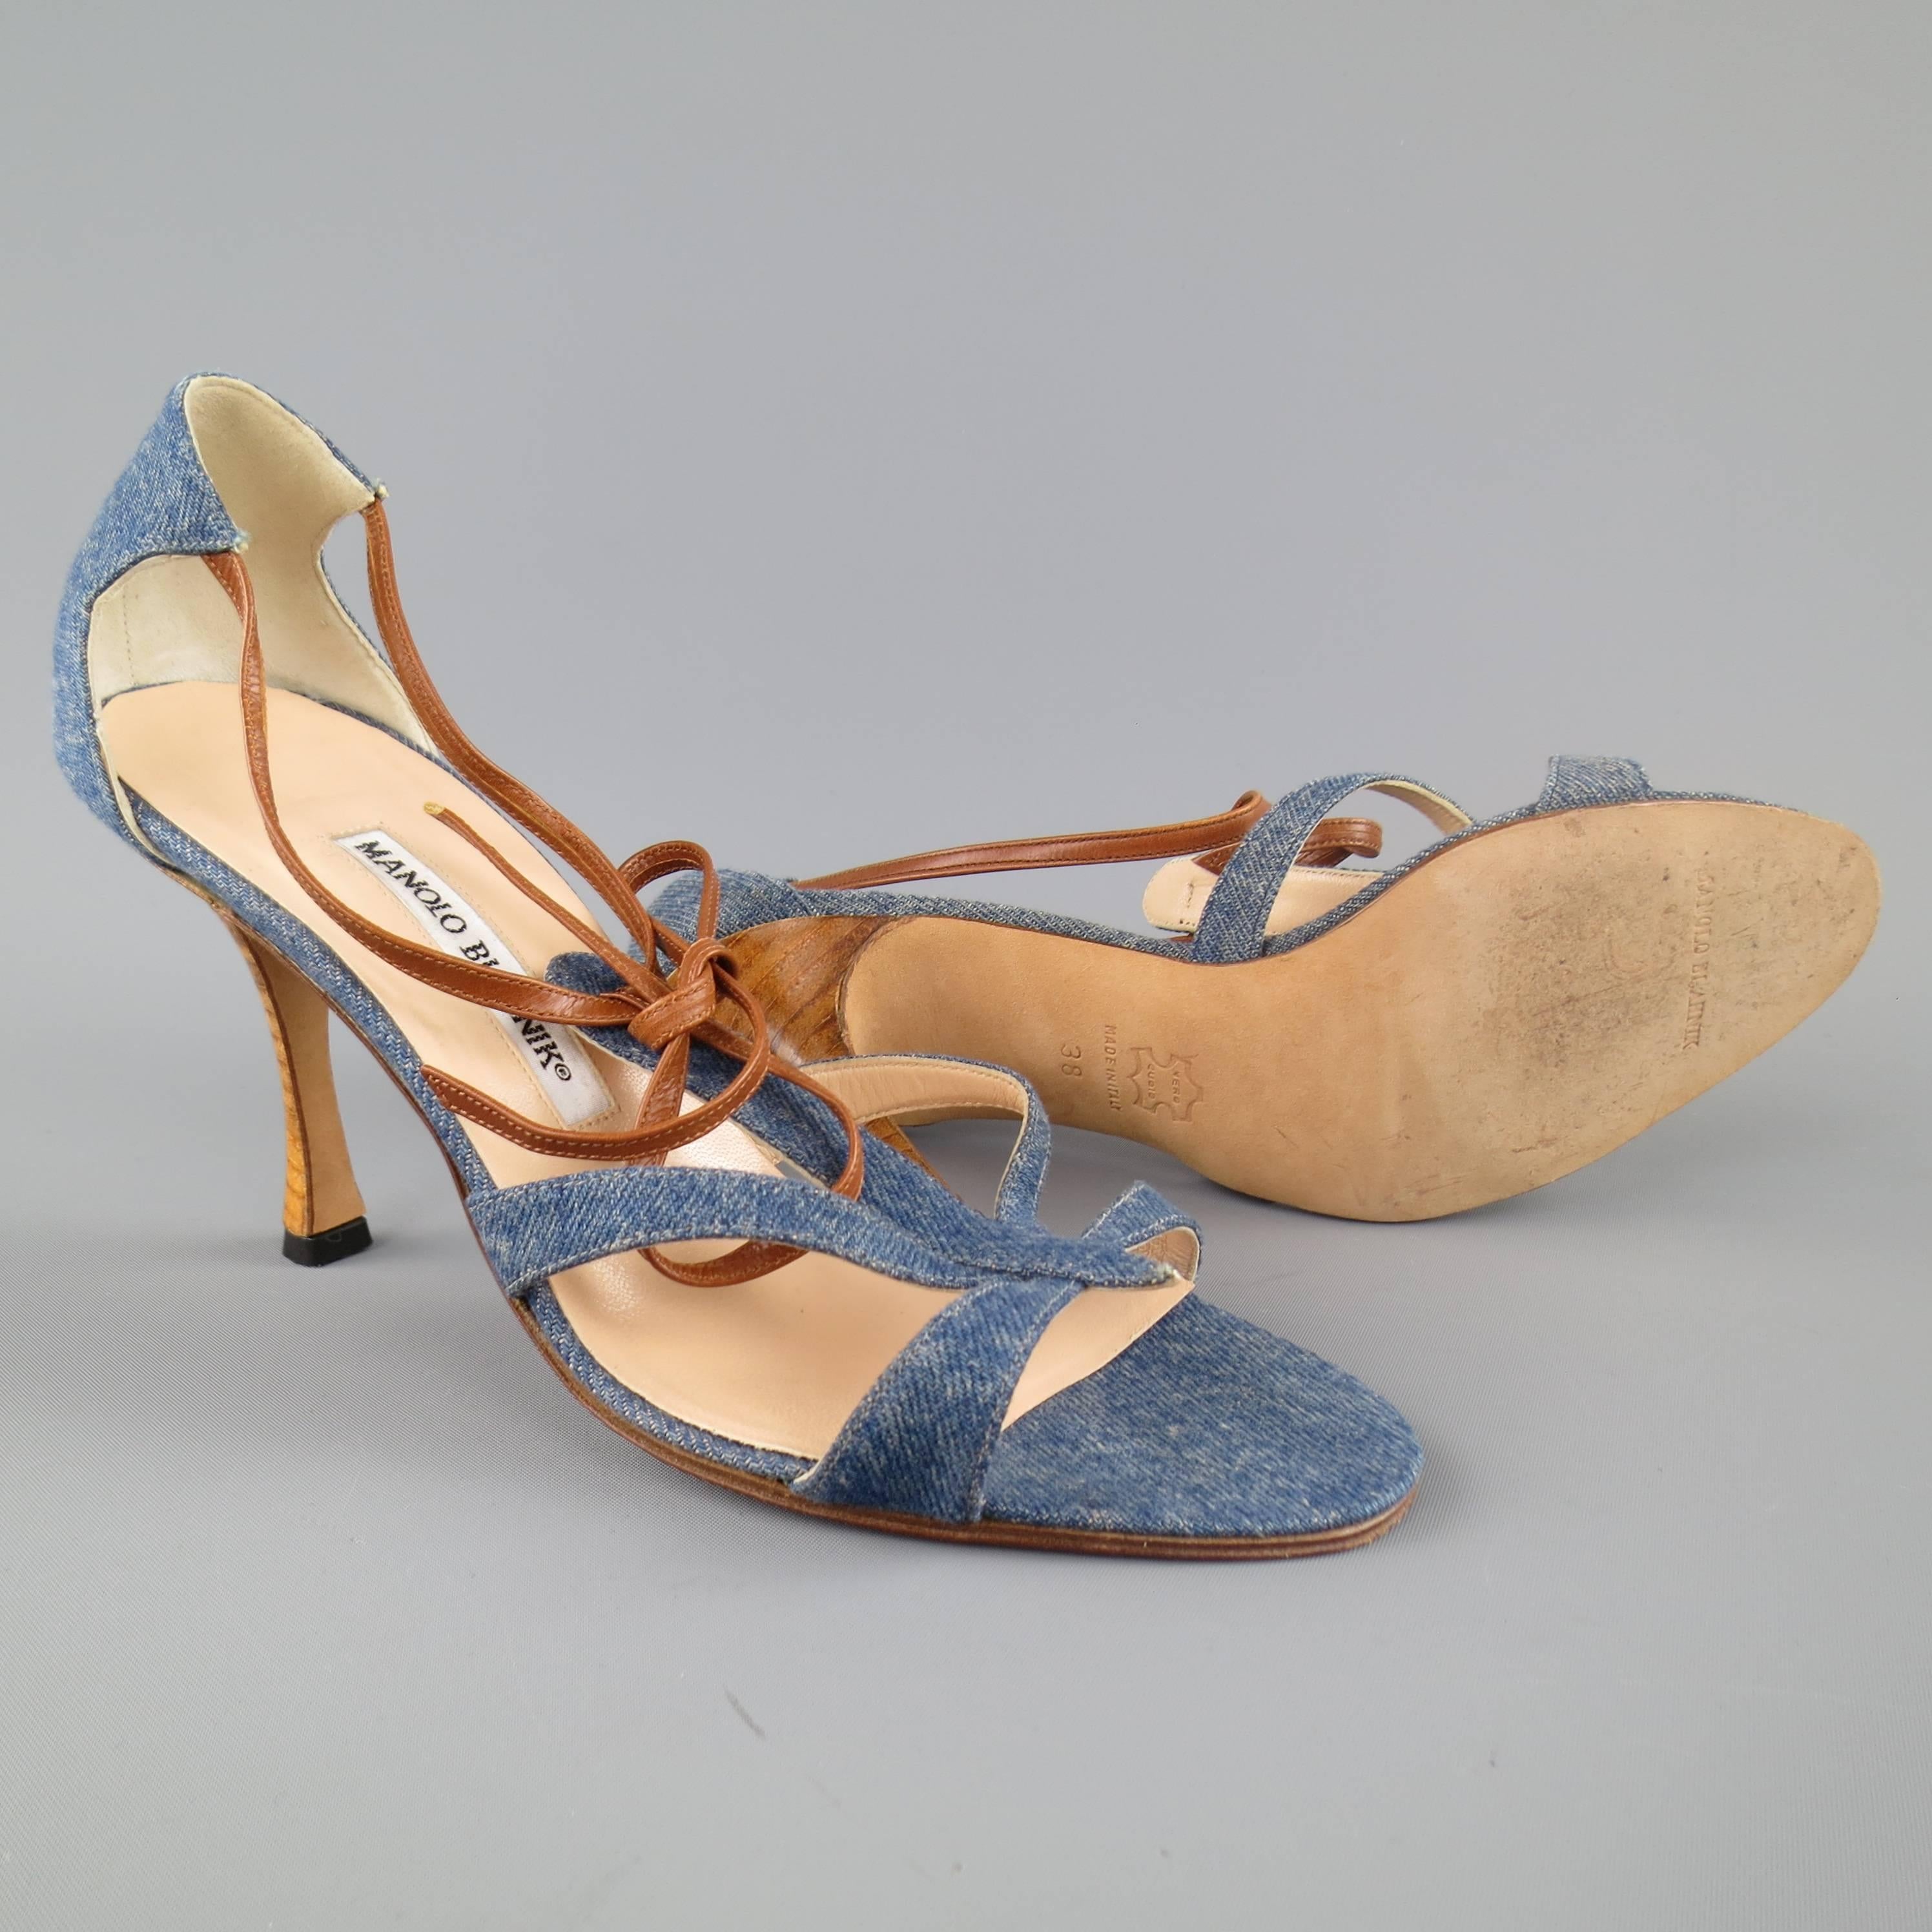 MANOLO BLAHNIK sandals in blue denim features a strappy front with tan leather bow accent. Made in Italy.
 
Good Pre-Owned Condition.
Marked: IT 38
 
Heel: 3.5 in.


Web ID: 82512 